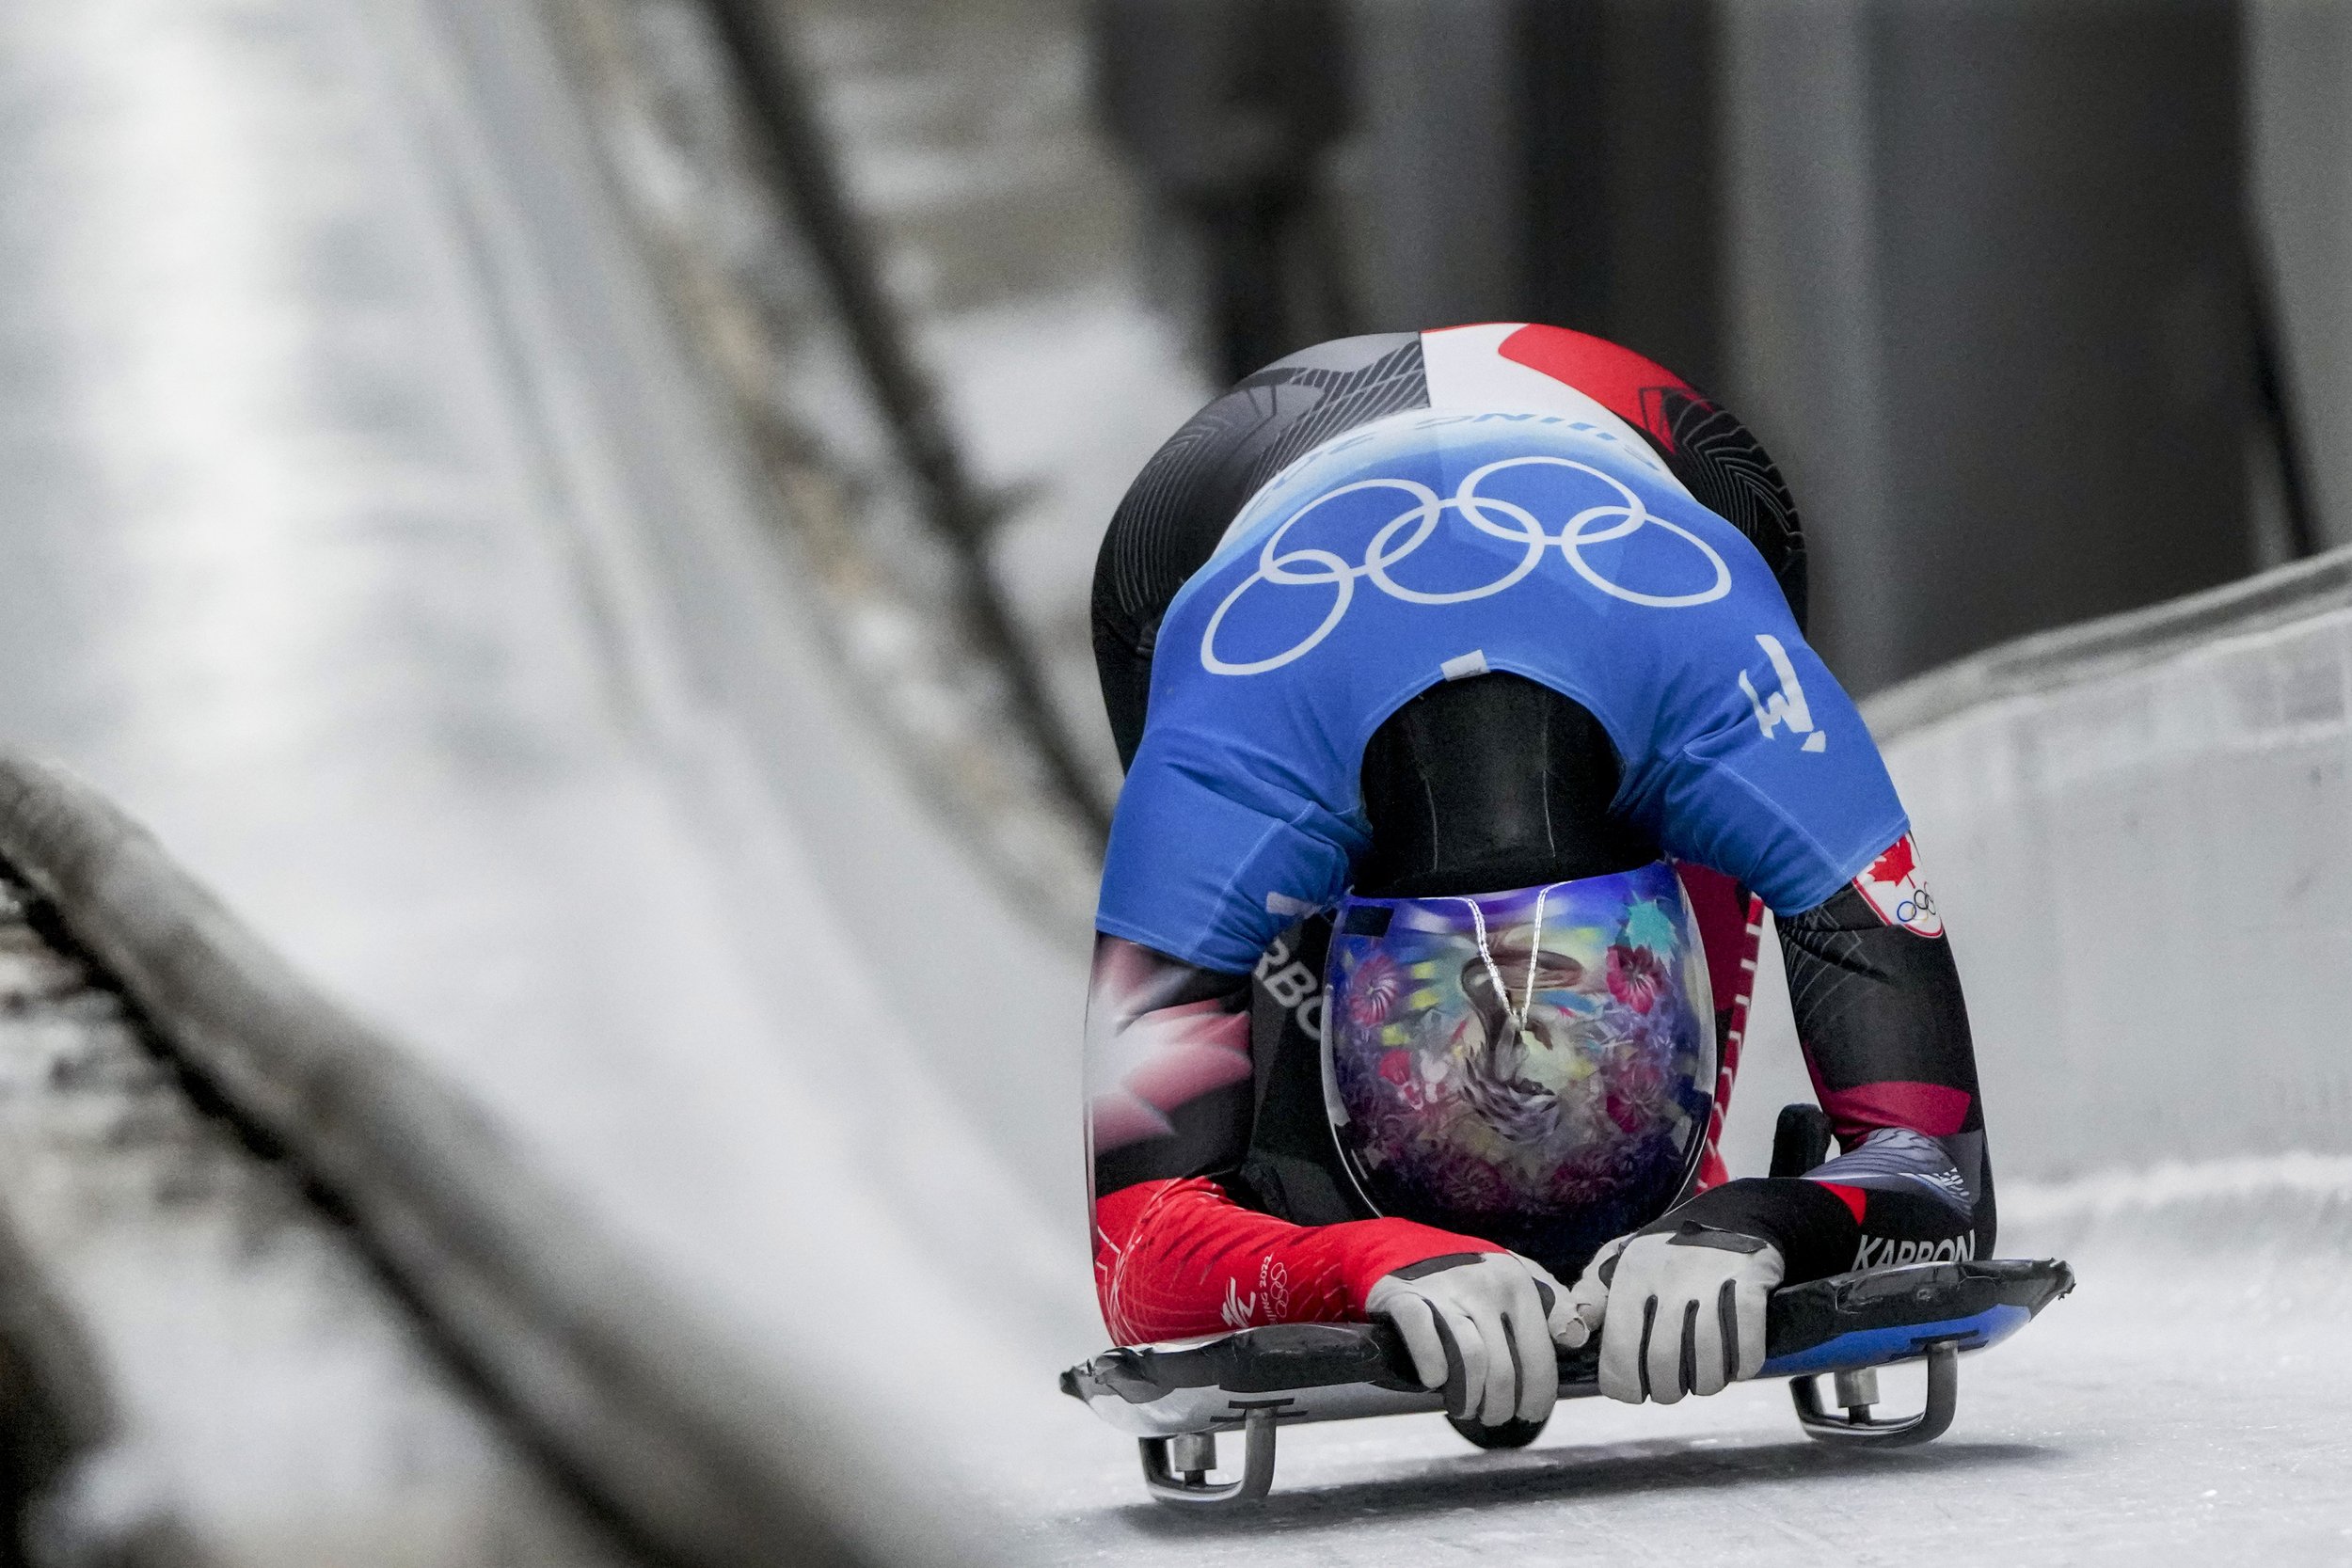  Mirela Rahneva, of Canada, looks down after the women's skeleton run 4 at the 2022 Winter Olympics, Saturday, Feb. 12, 2022, in the Yanqing district of Beijing. (AP Photo/Pavel Golovkin) 